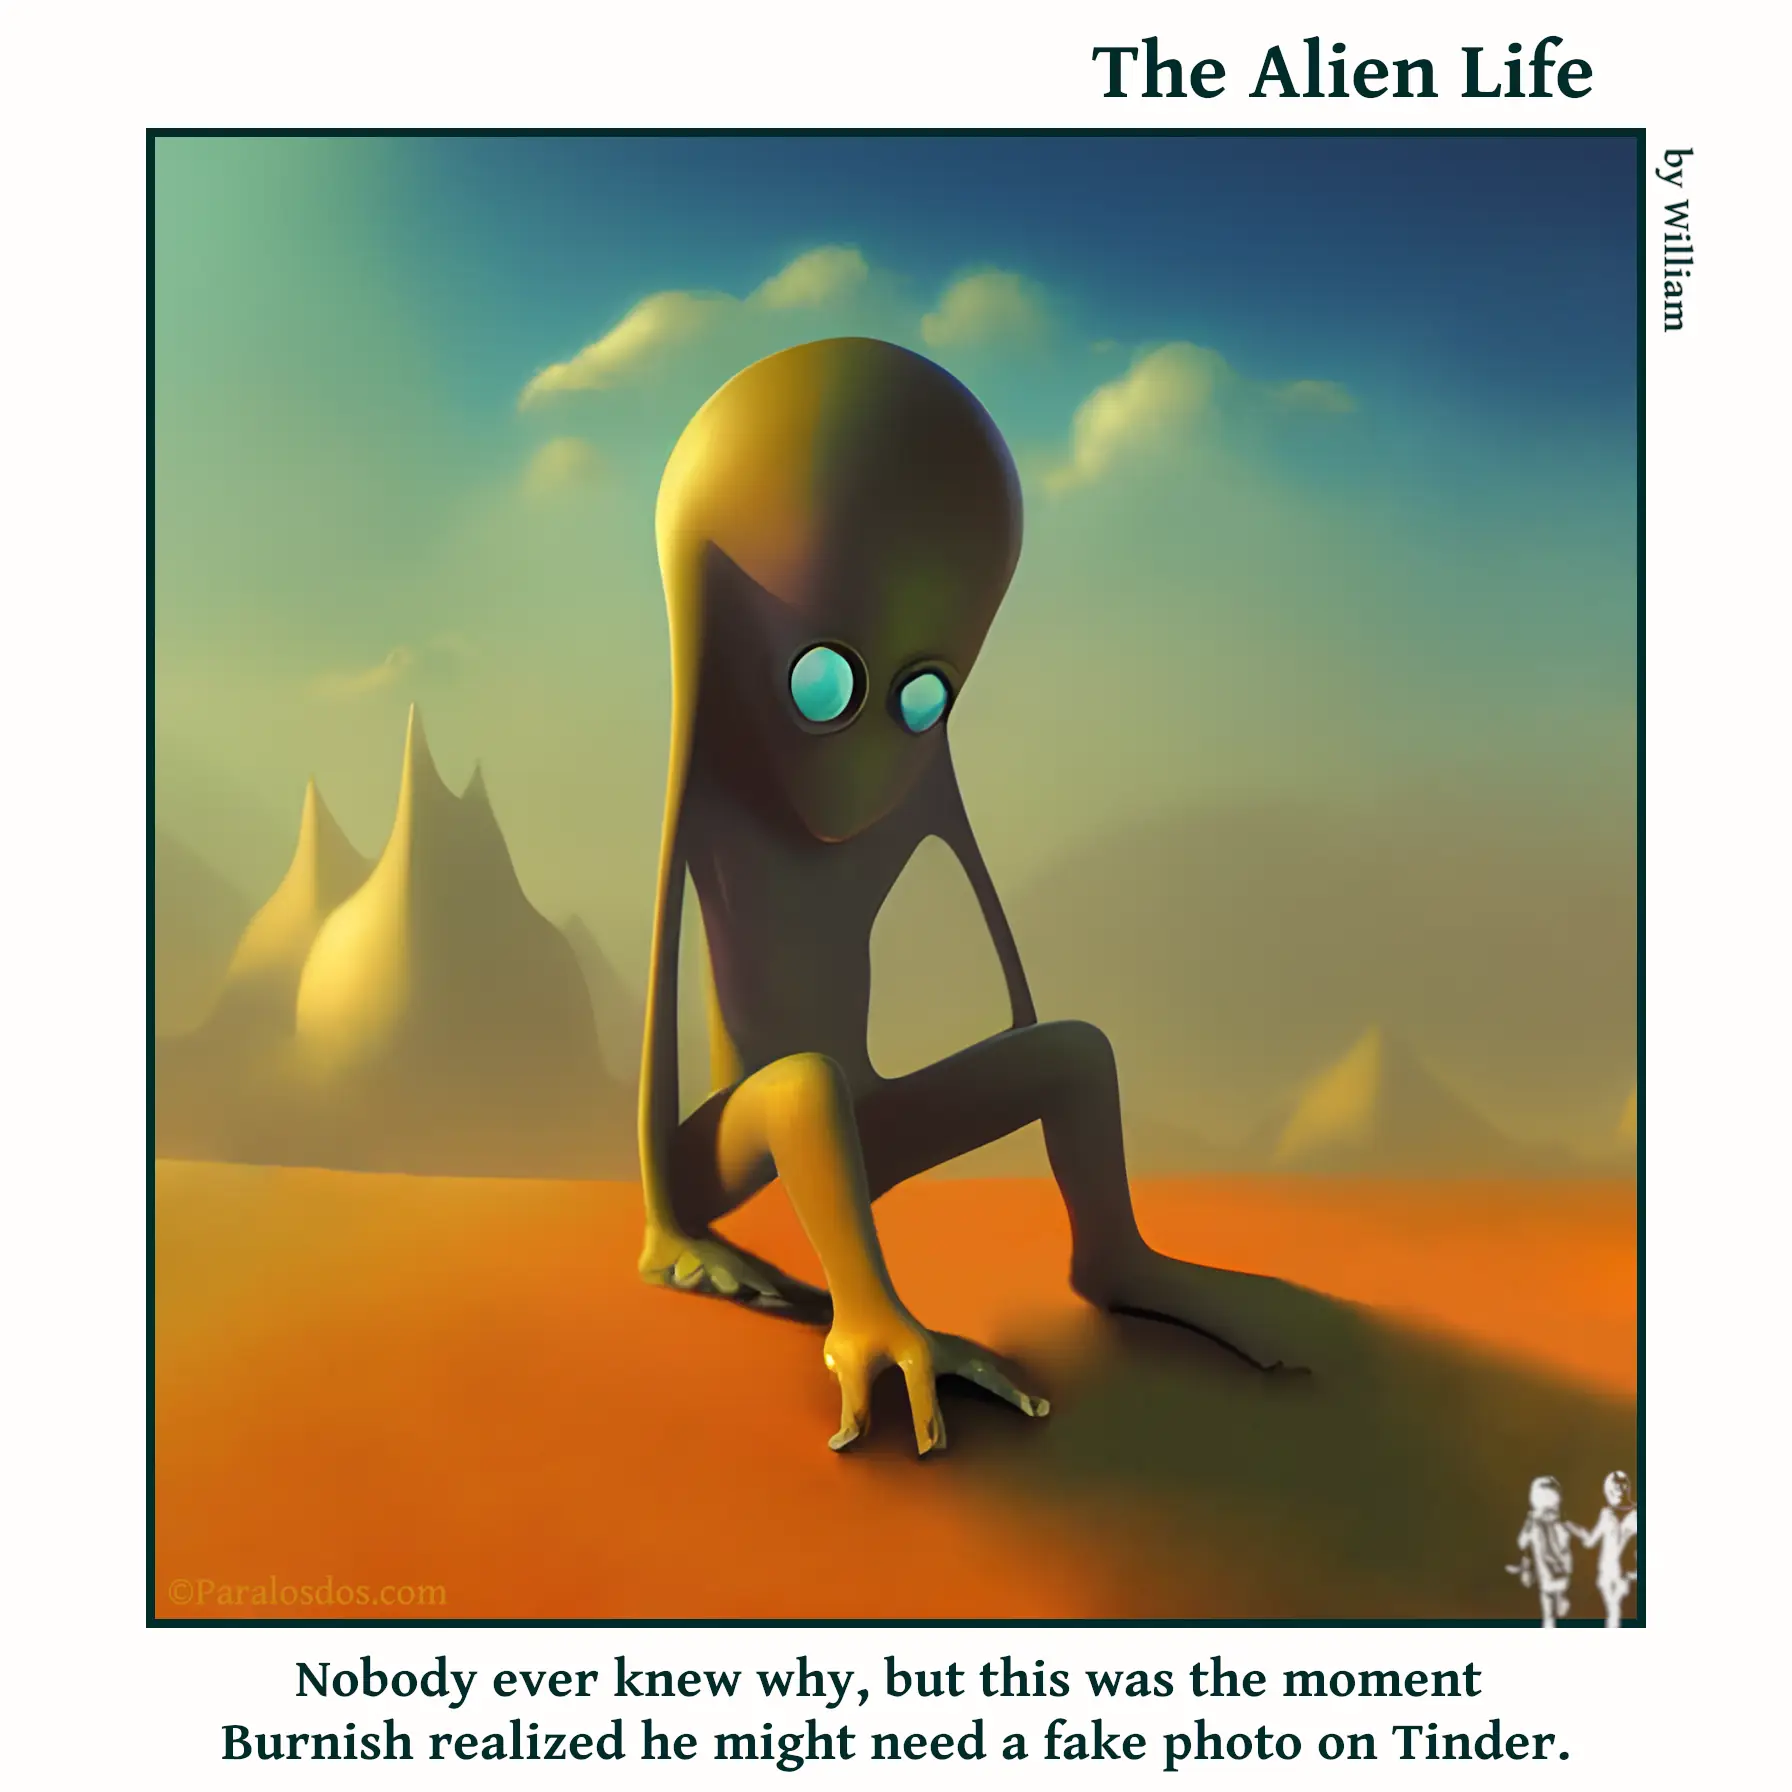 The Alien Life, one panel Comic. A very weird looking alien is sitting on the ground, looking very reflective and a bit sad. The caption reads: Nobody ever knew why, but this was the moment Burnish realized he might need a fake photo on Tinder.